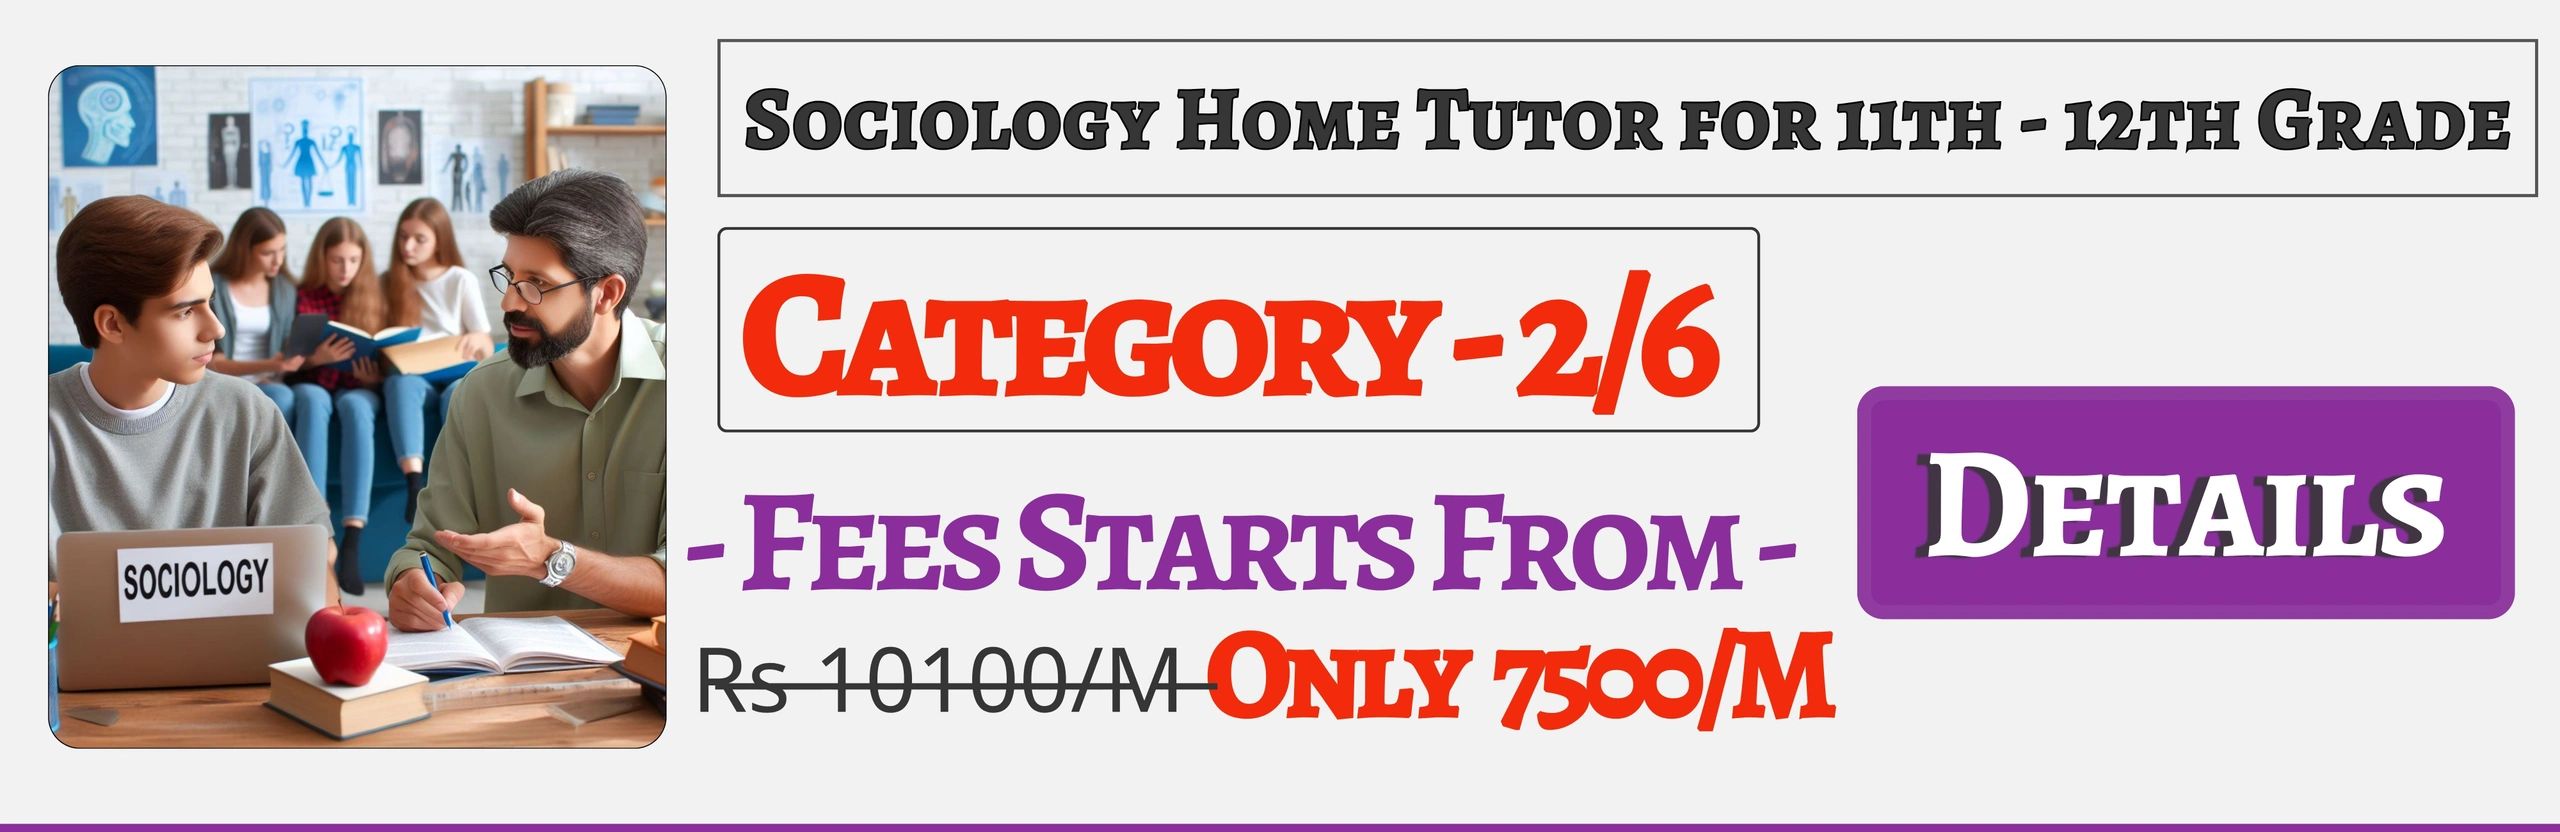 Book Best Nearby Sociology Home Tuition Tutors For 11th & 12th In Jaipur , Fees Only 7500/M